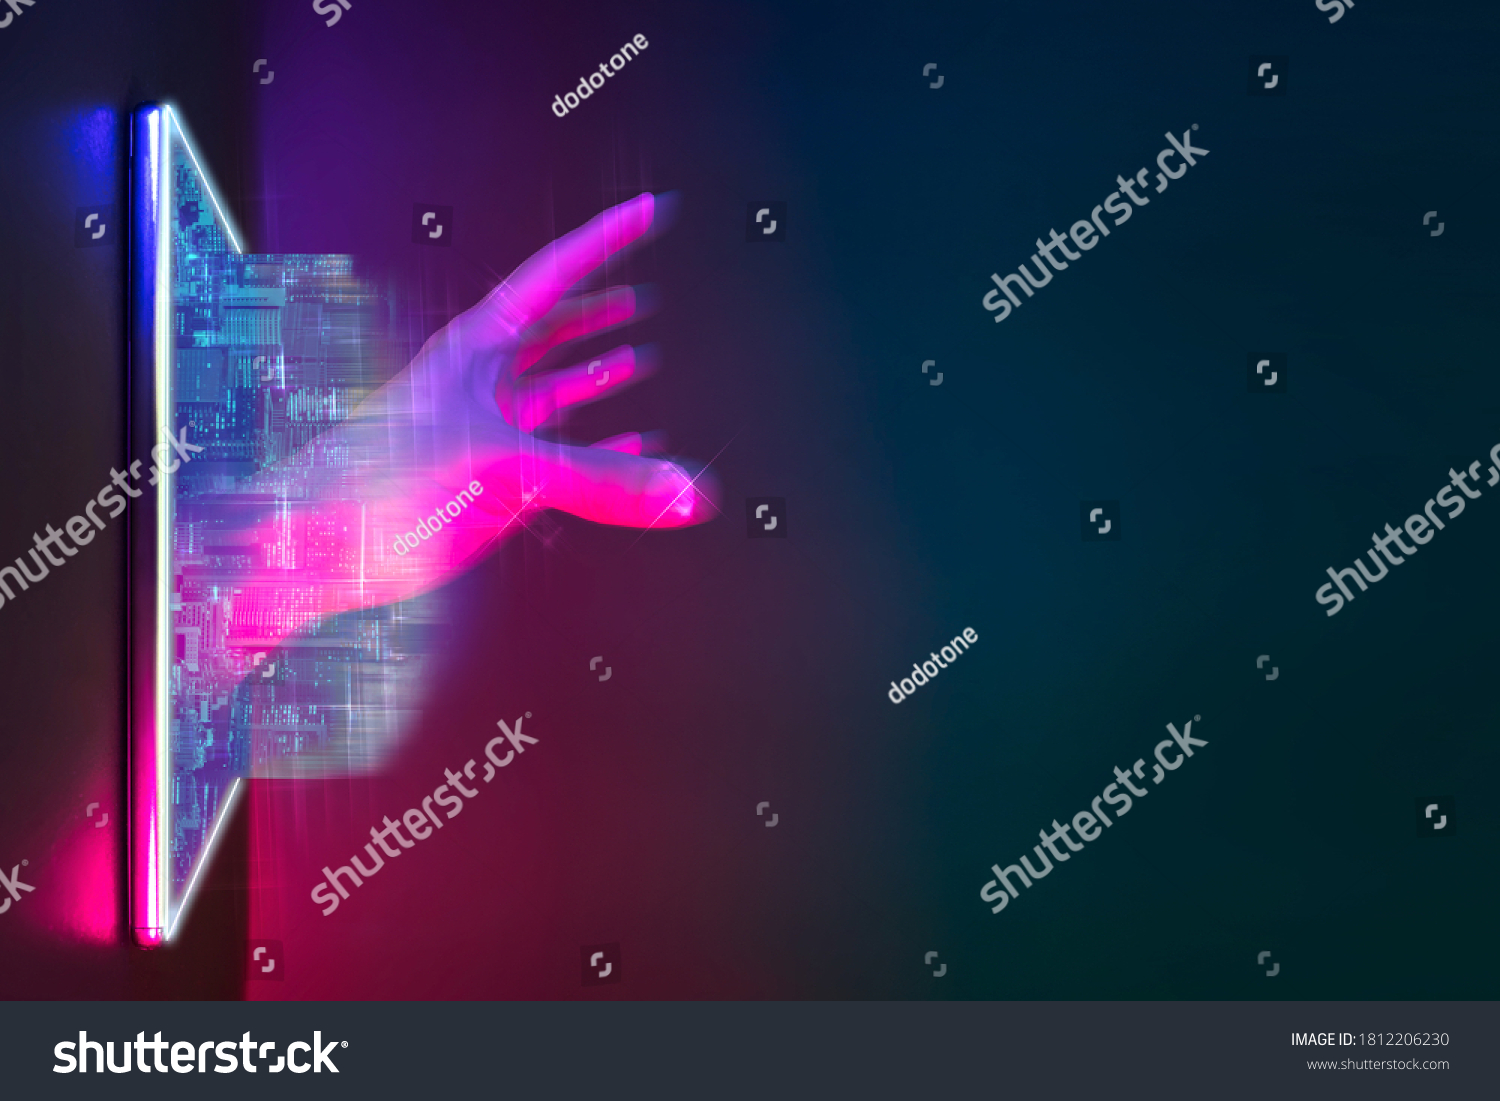 Future technology cyberpunk neon color concept. Mobile phone with city and artificial intelligence hand hologram for digital technology. Background copy space on right side. #1812206230